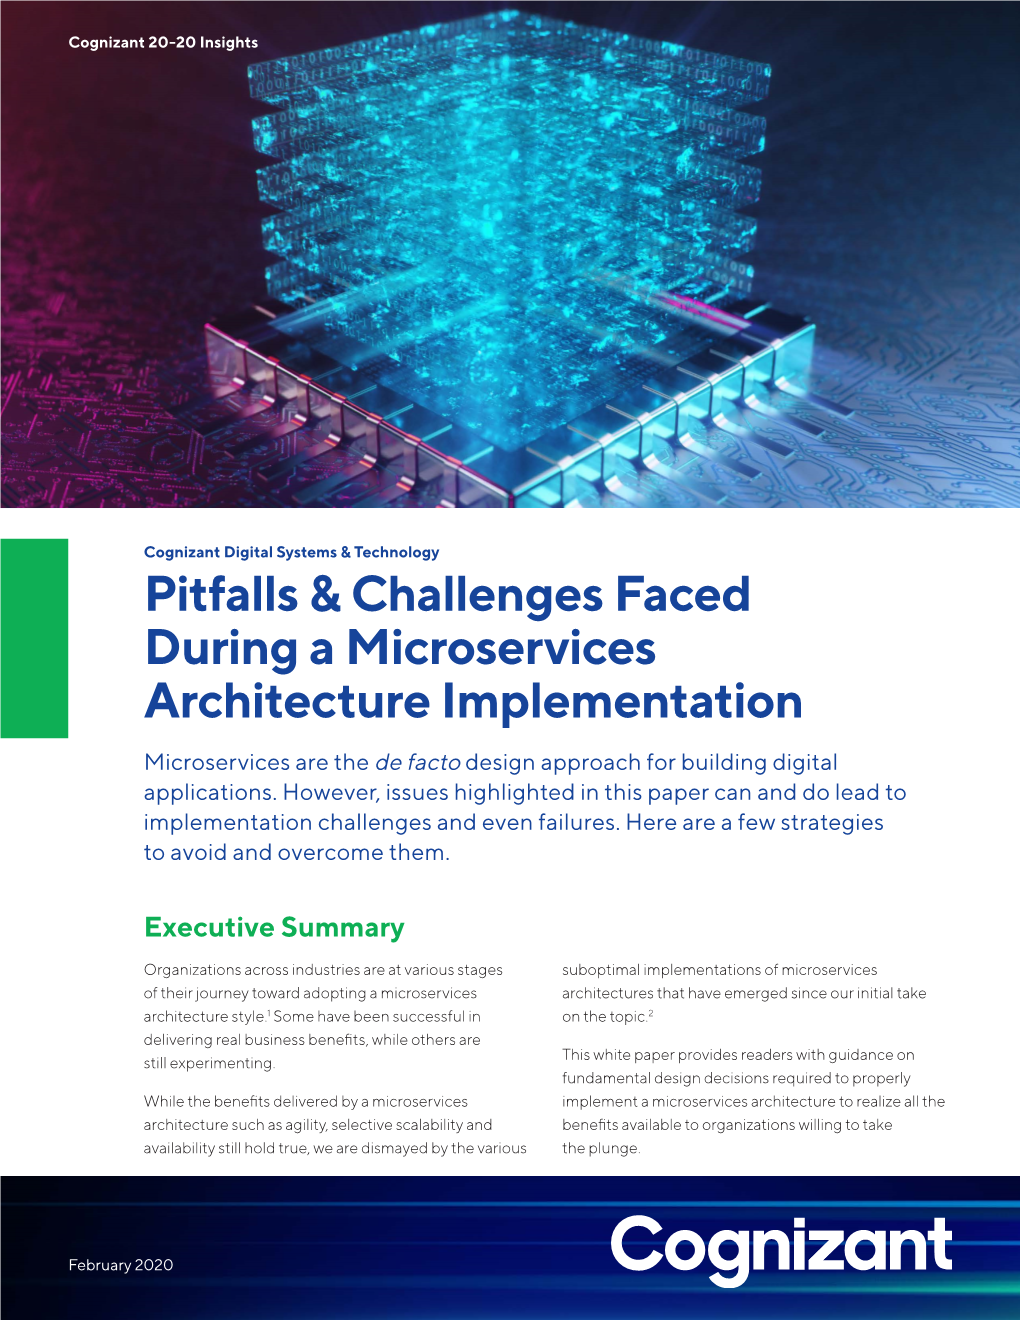 Pitfalls & Challenges Faced During a Microservices Architecture Implementation